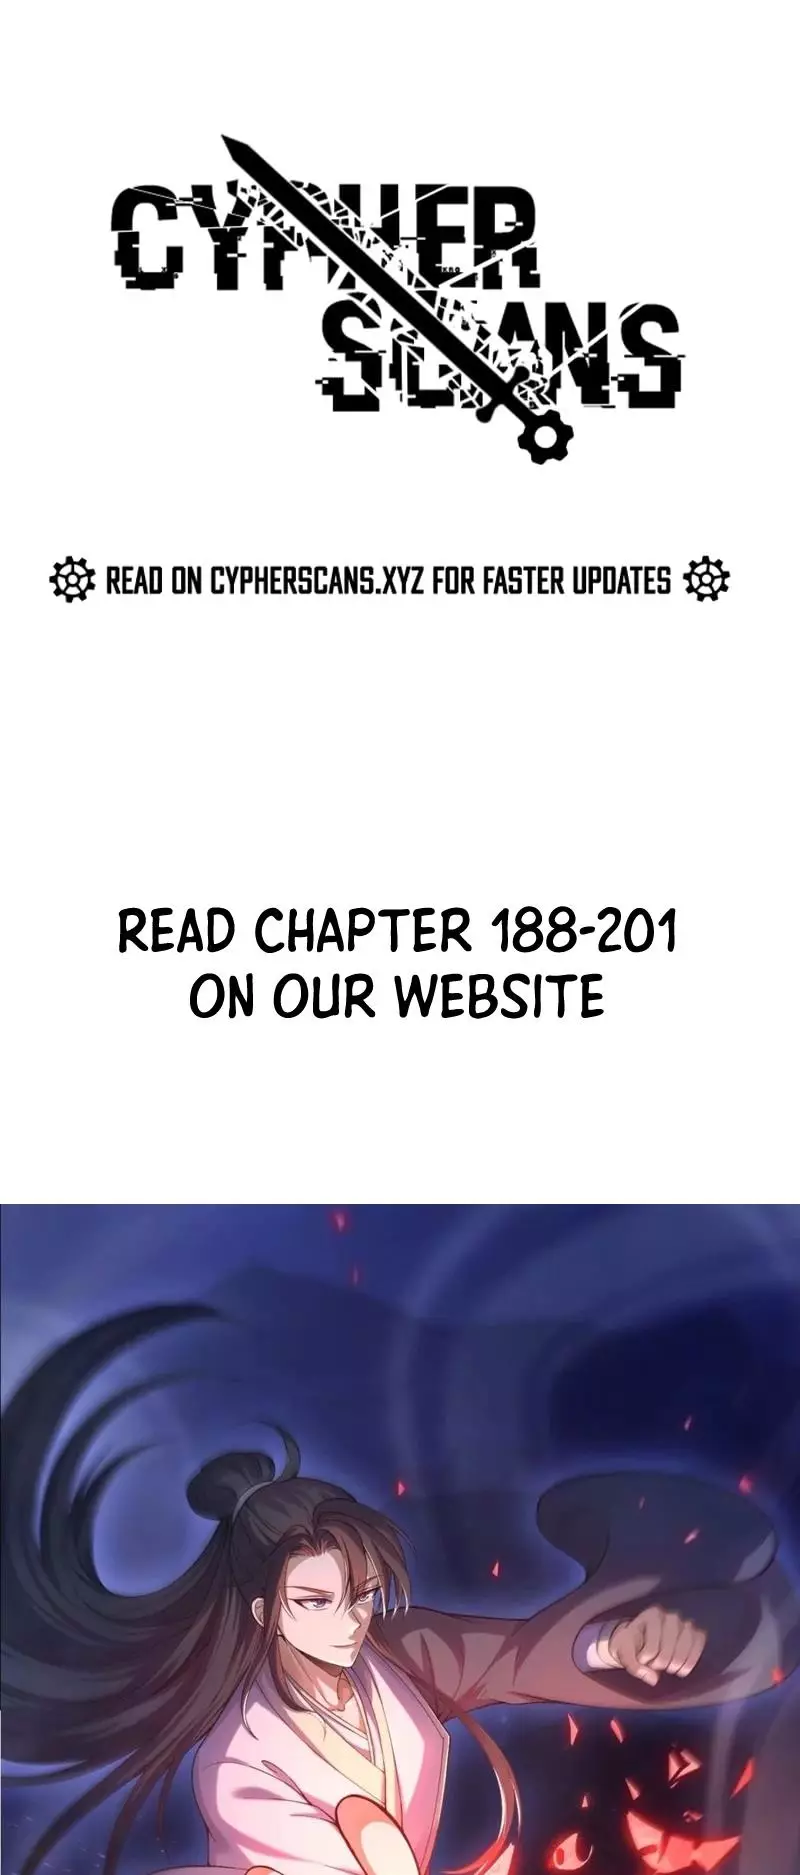 Invincible After A Hundred Years Of Seclusion - 187 page 1-0000c361